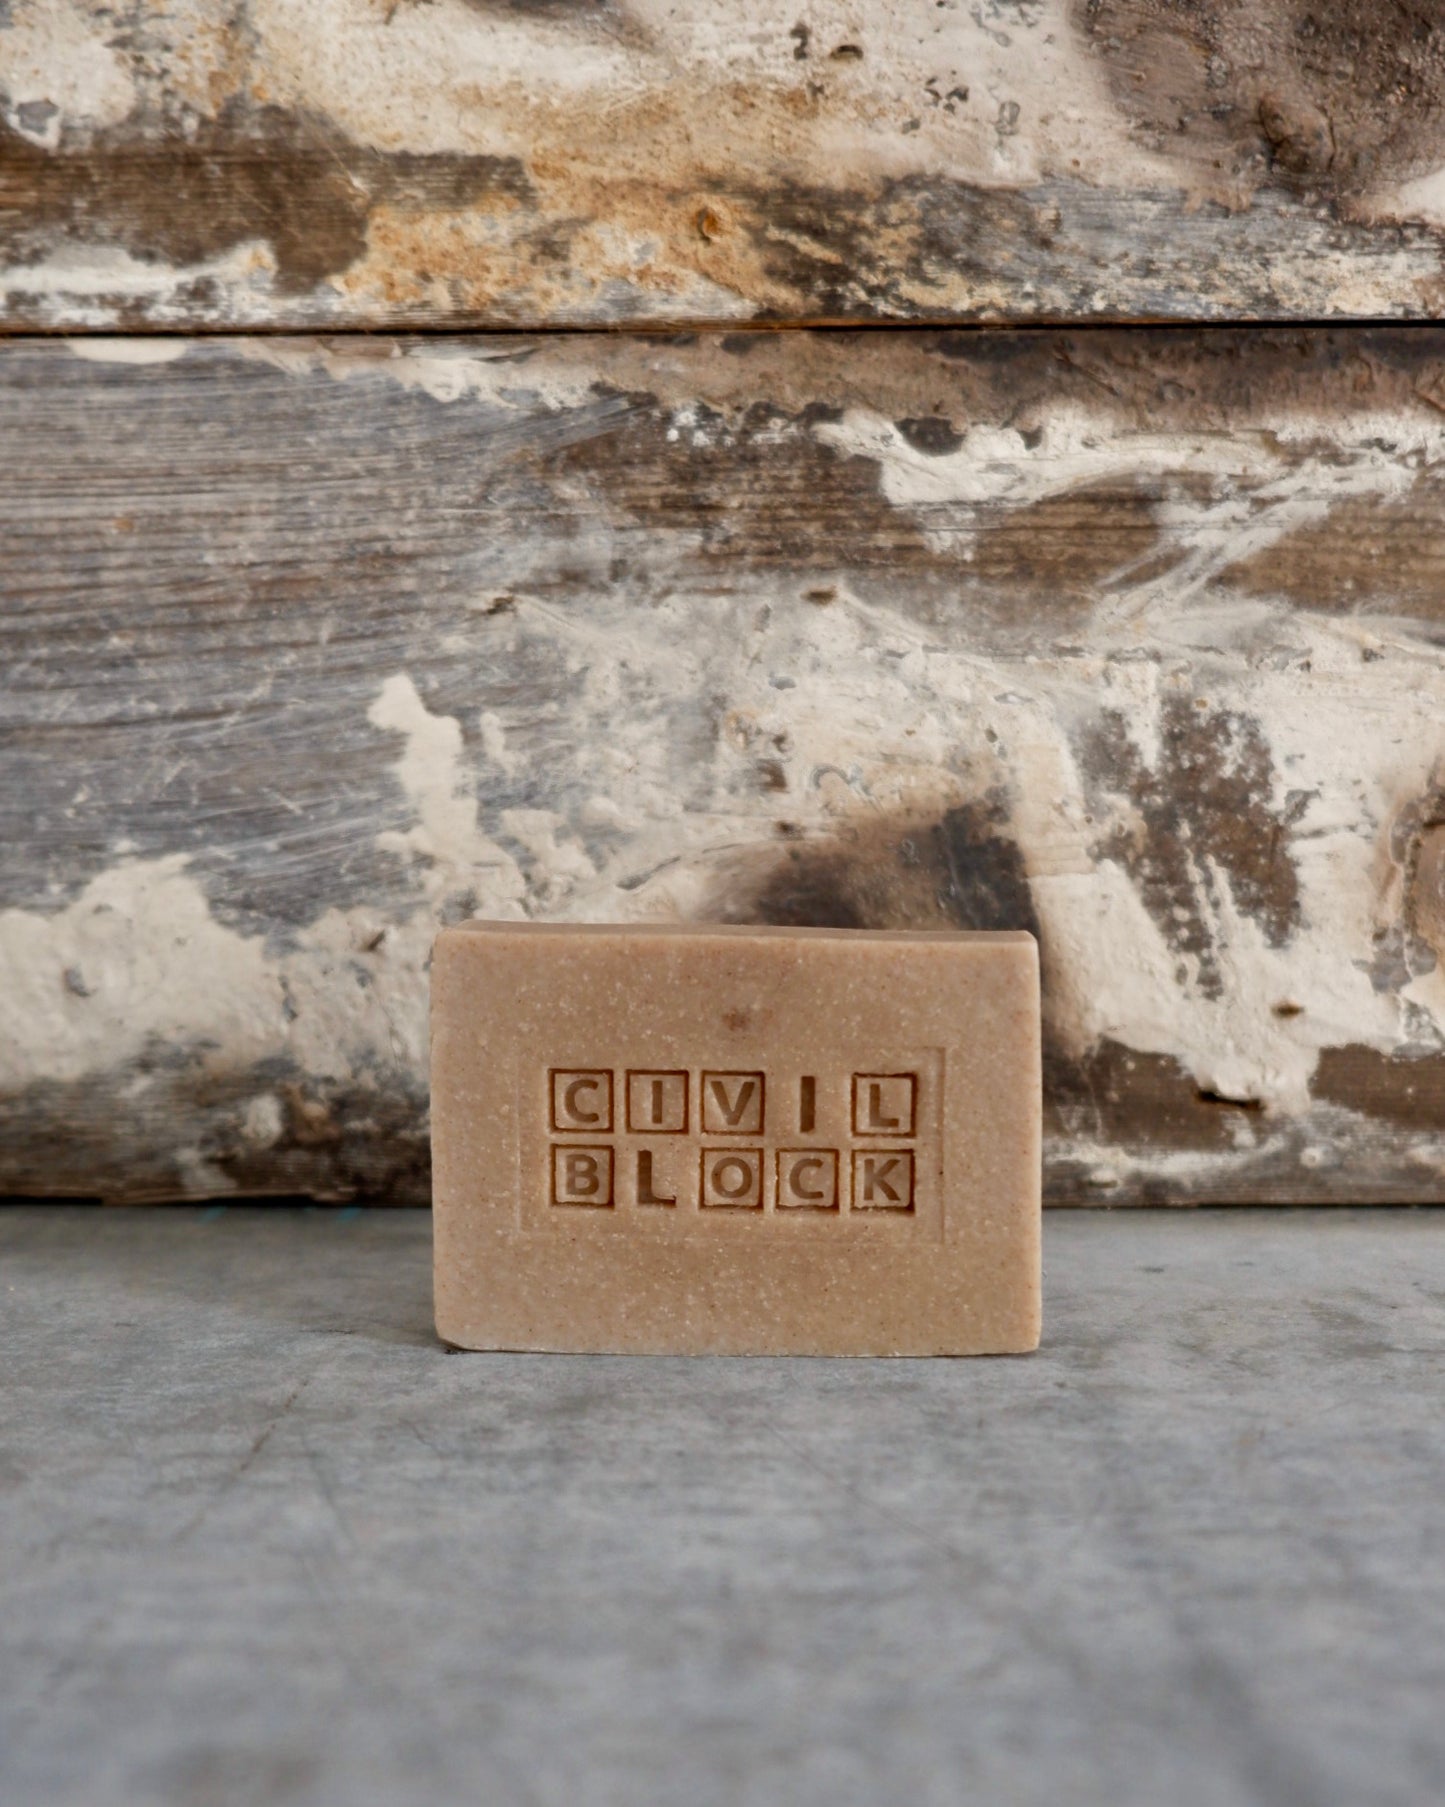 civil block microsoapery natural soap beauty and wellbeing Chopping block - Spruce, Pine & Cedar Soap